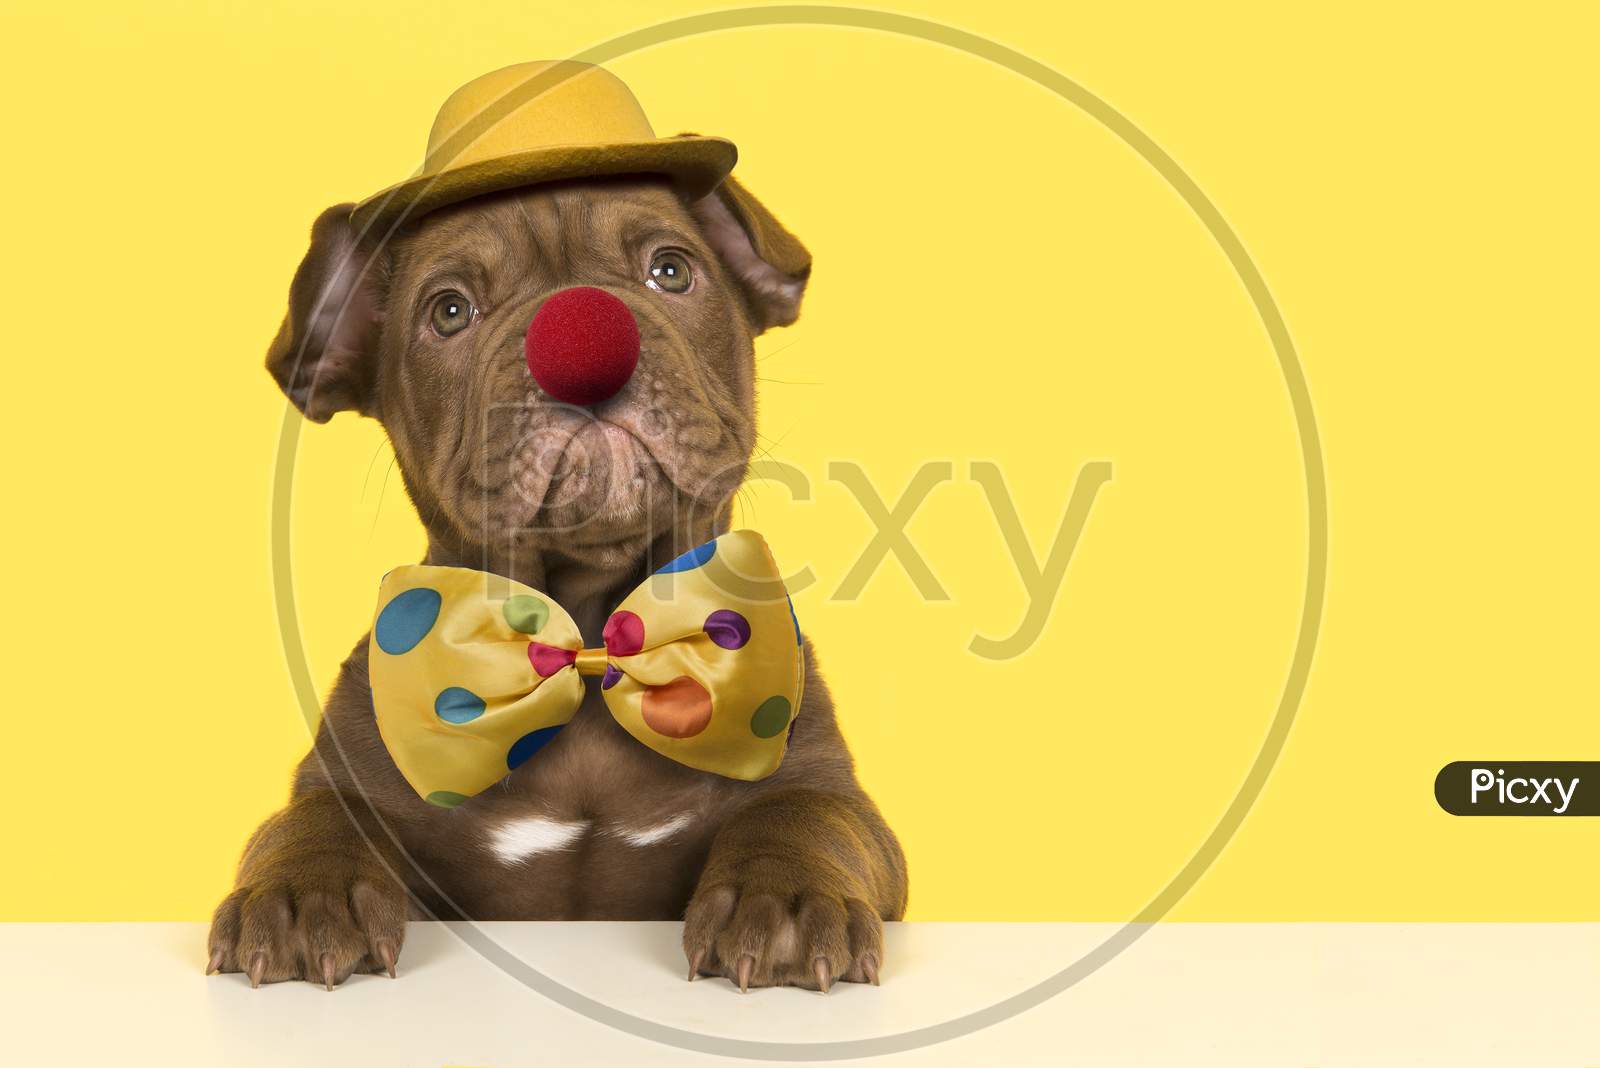 Cute Old English Bulldog Puppy Dressep Up As A Clown With Bow, Hat And A Red Nose On A Yellow Background